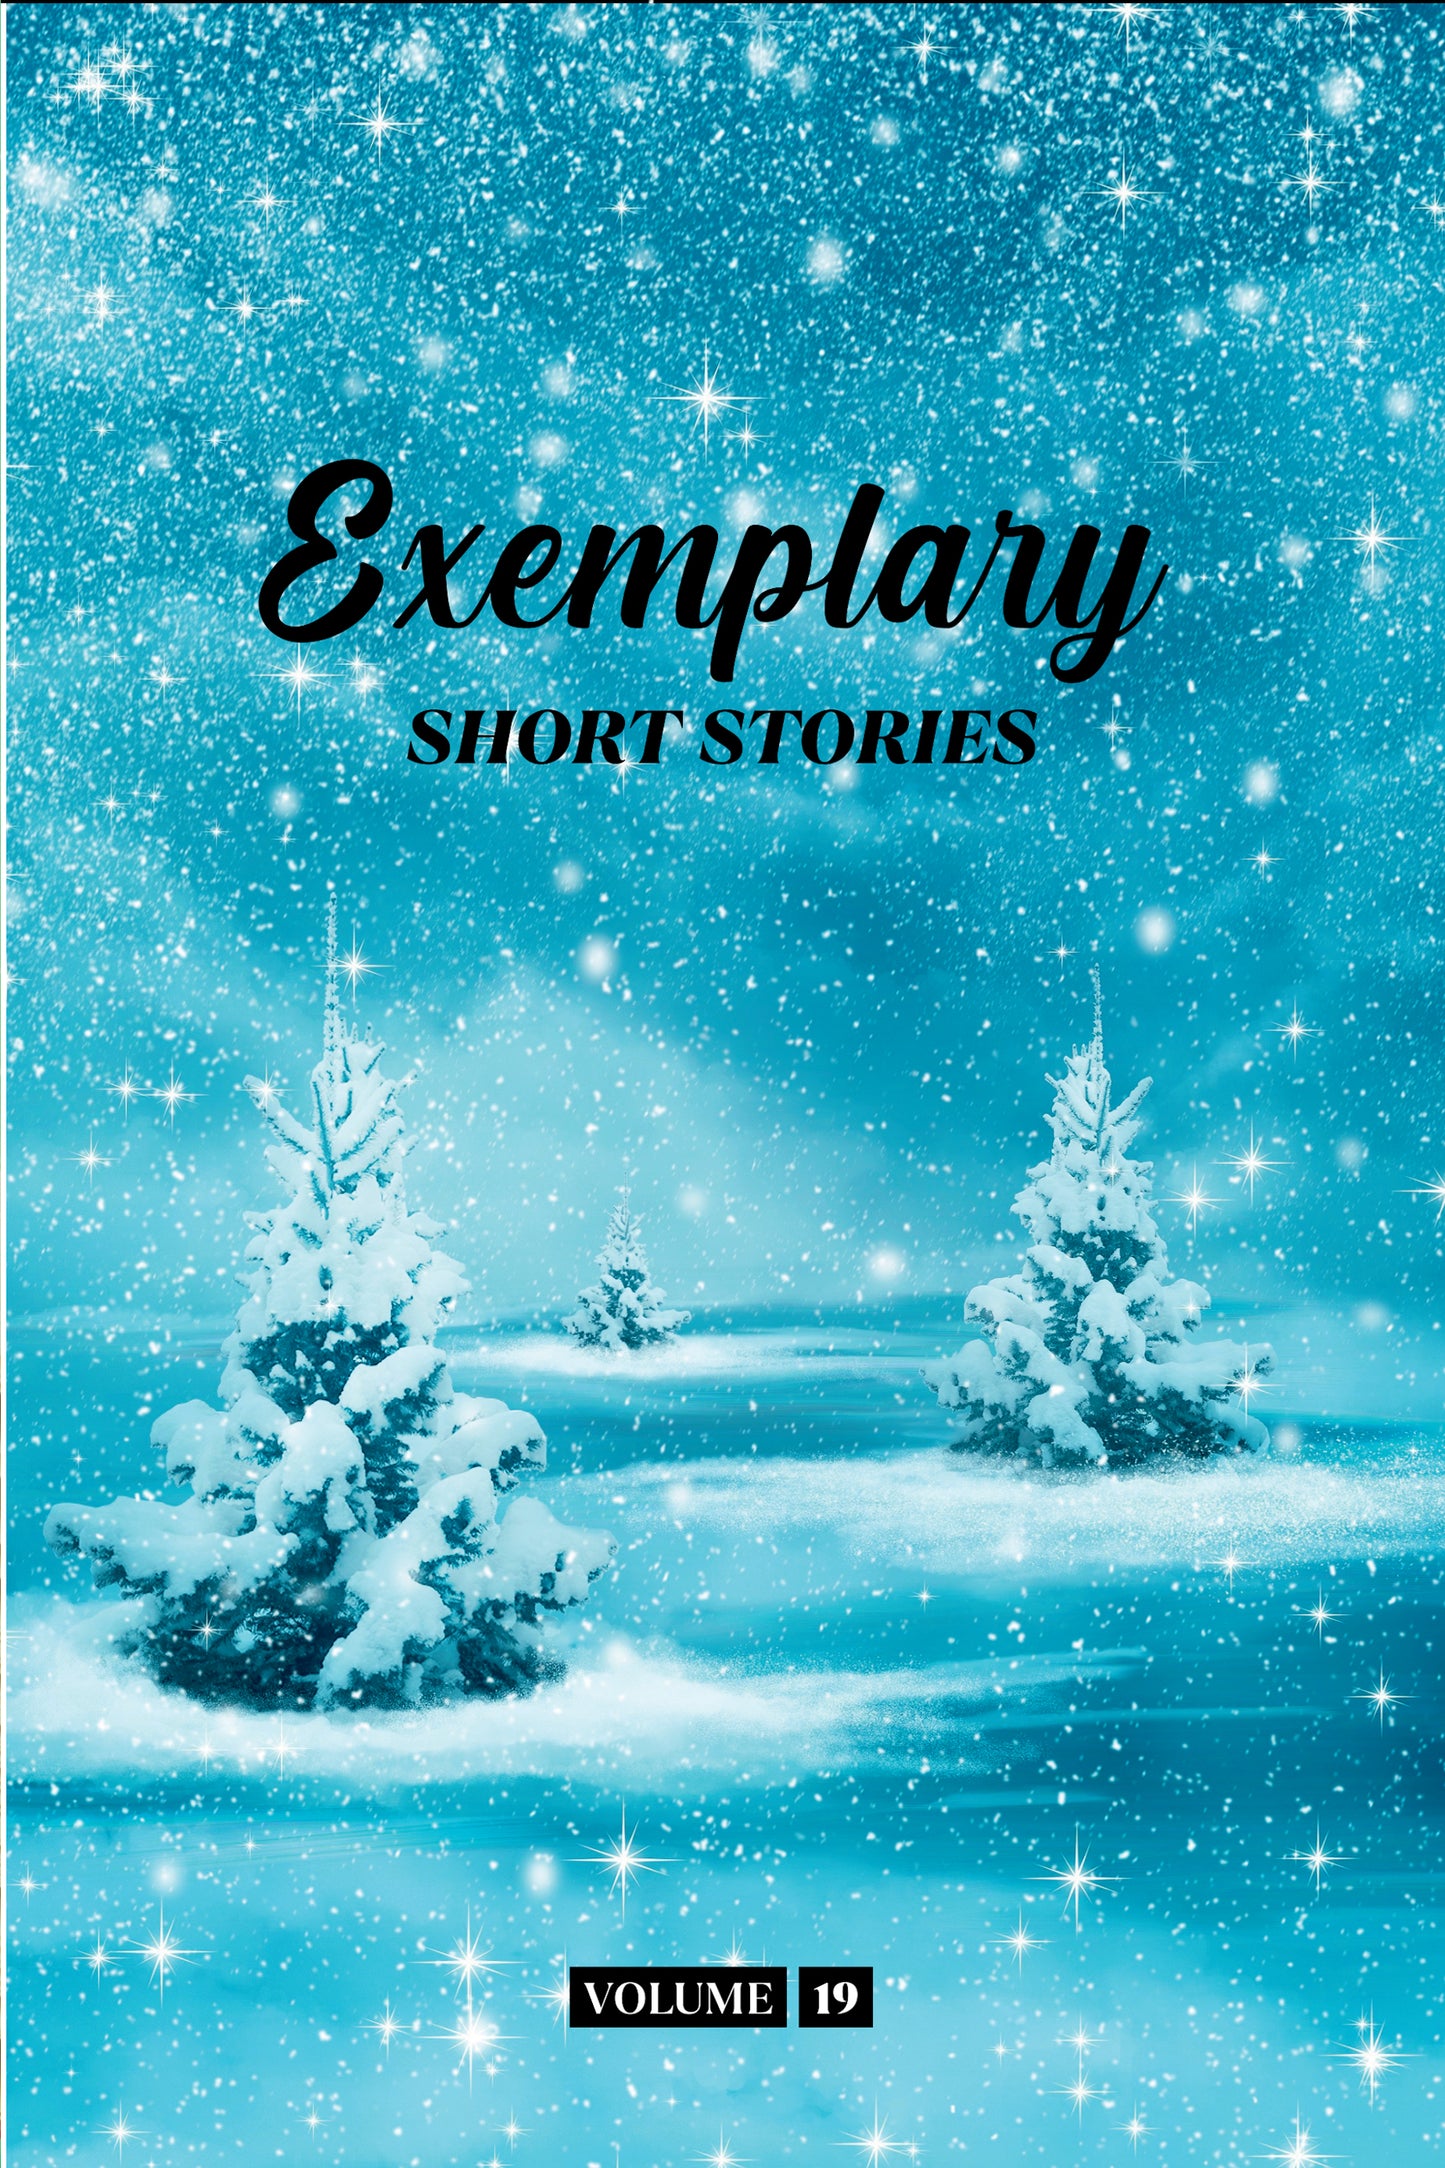 Exemplary Short Stories Volume 19 (Physical Book Pre-Order)